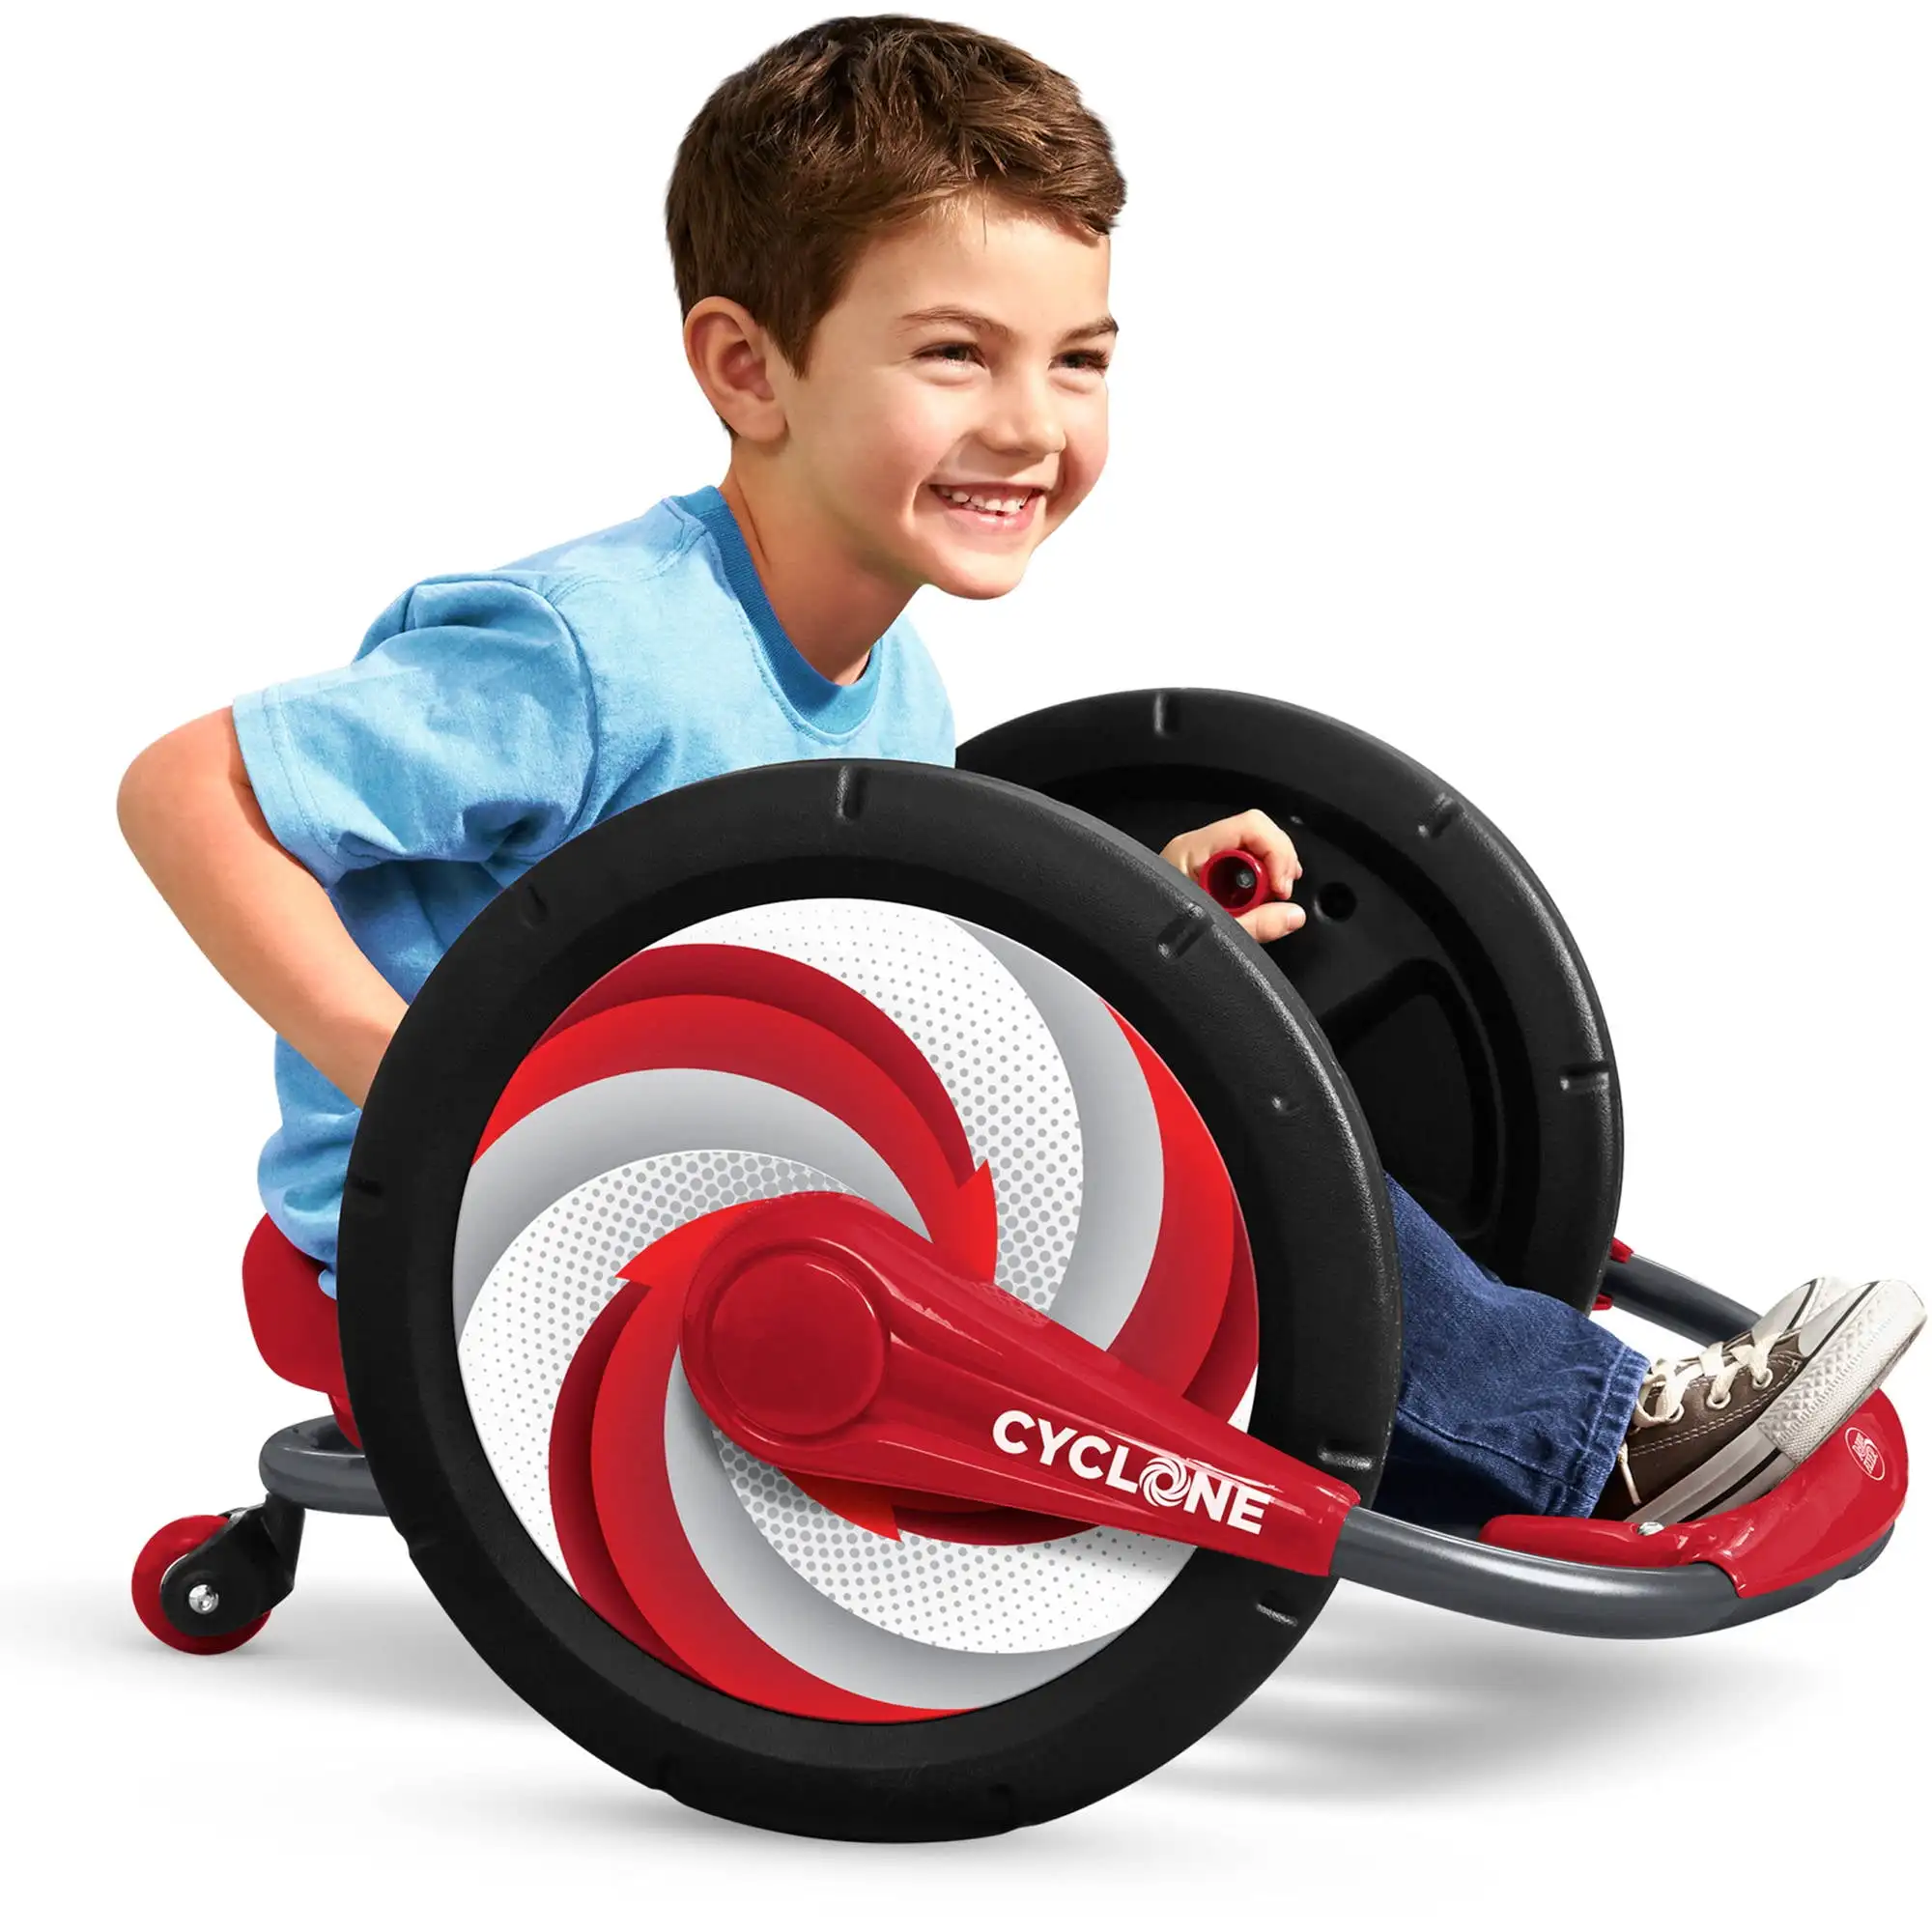 

RD Flyer Cyclone Ride-on for Kids - Arm Powered, 16" Wheels, Red